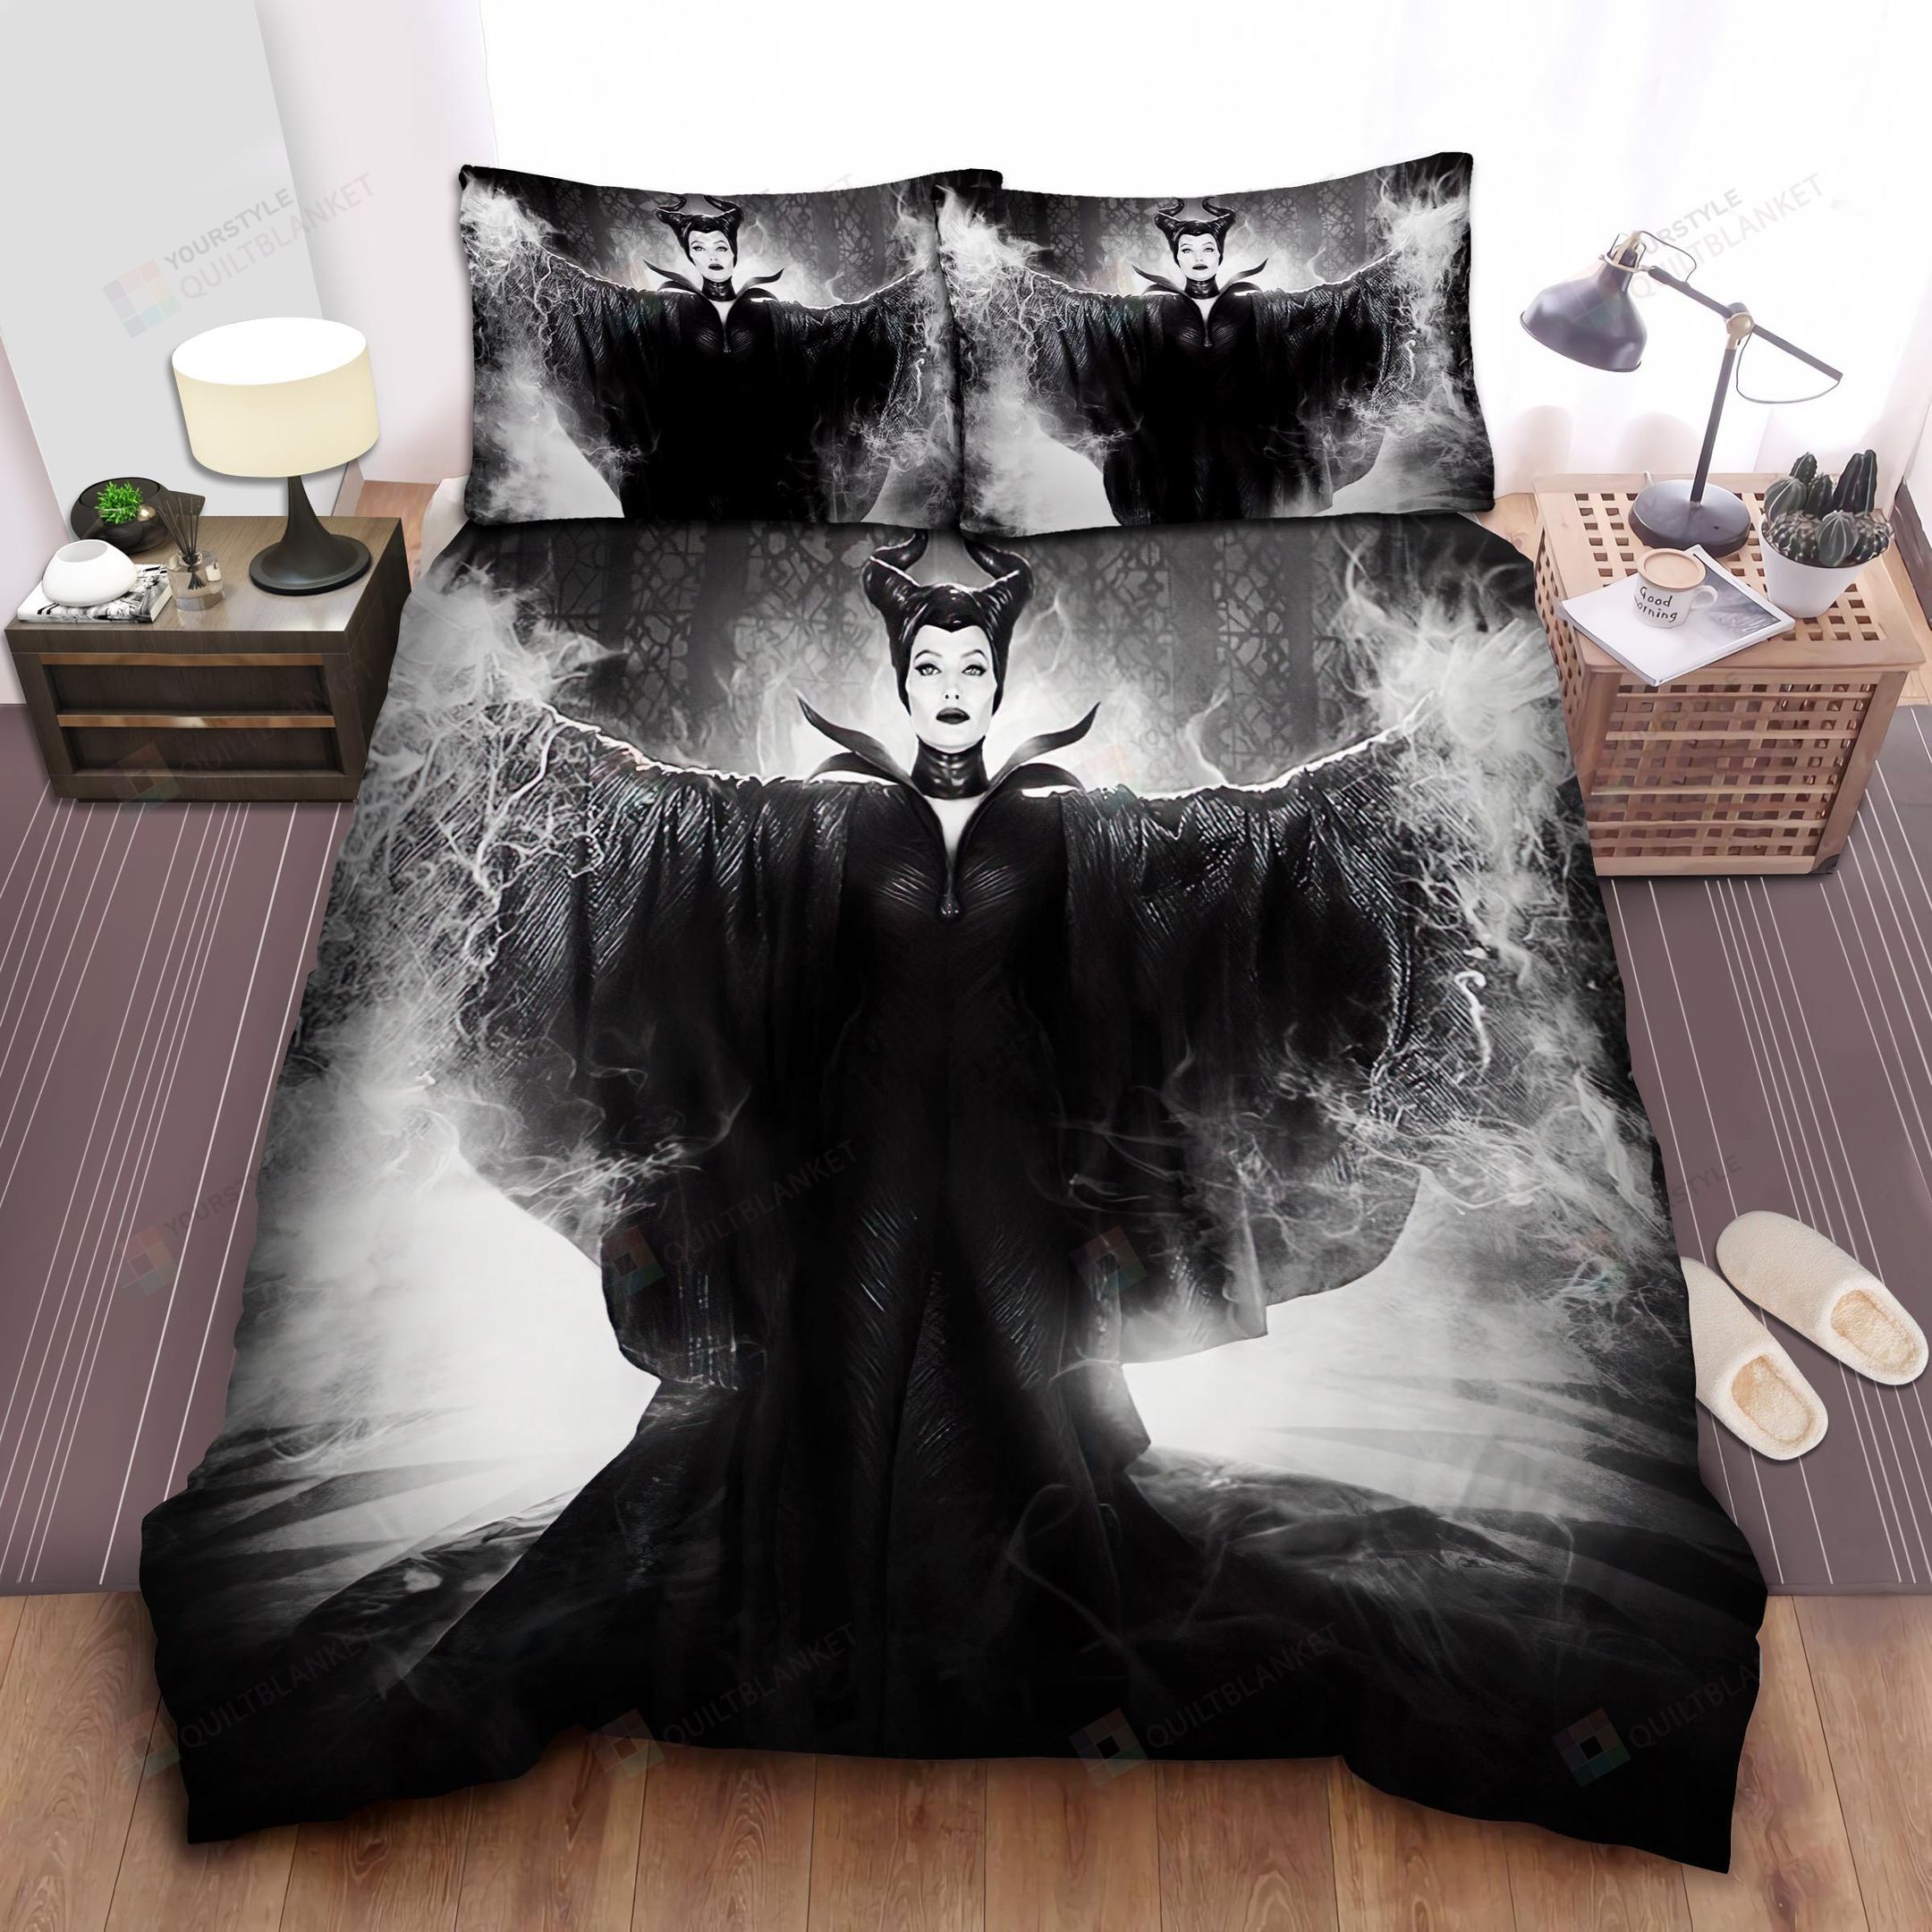 Maleficent Black And White Bed Sheets Spread Comforter Duvet Cover Bedding Sets